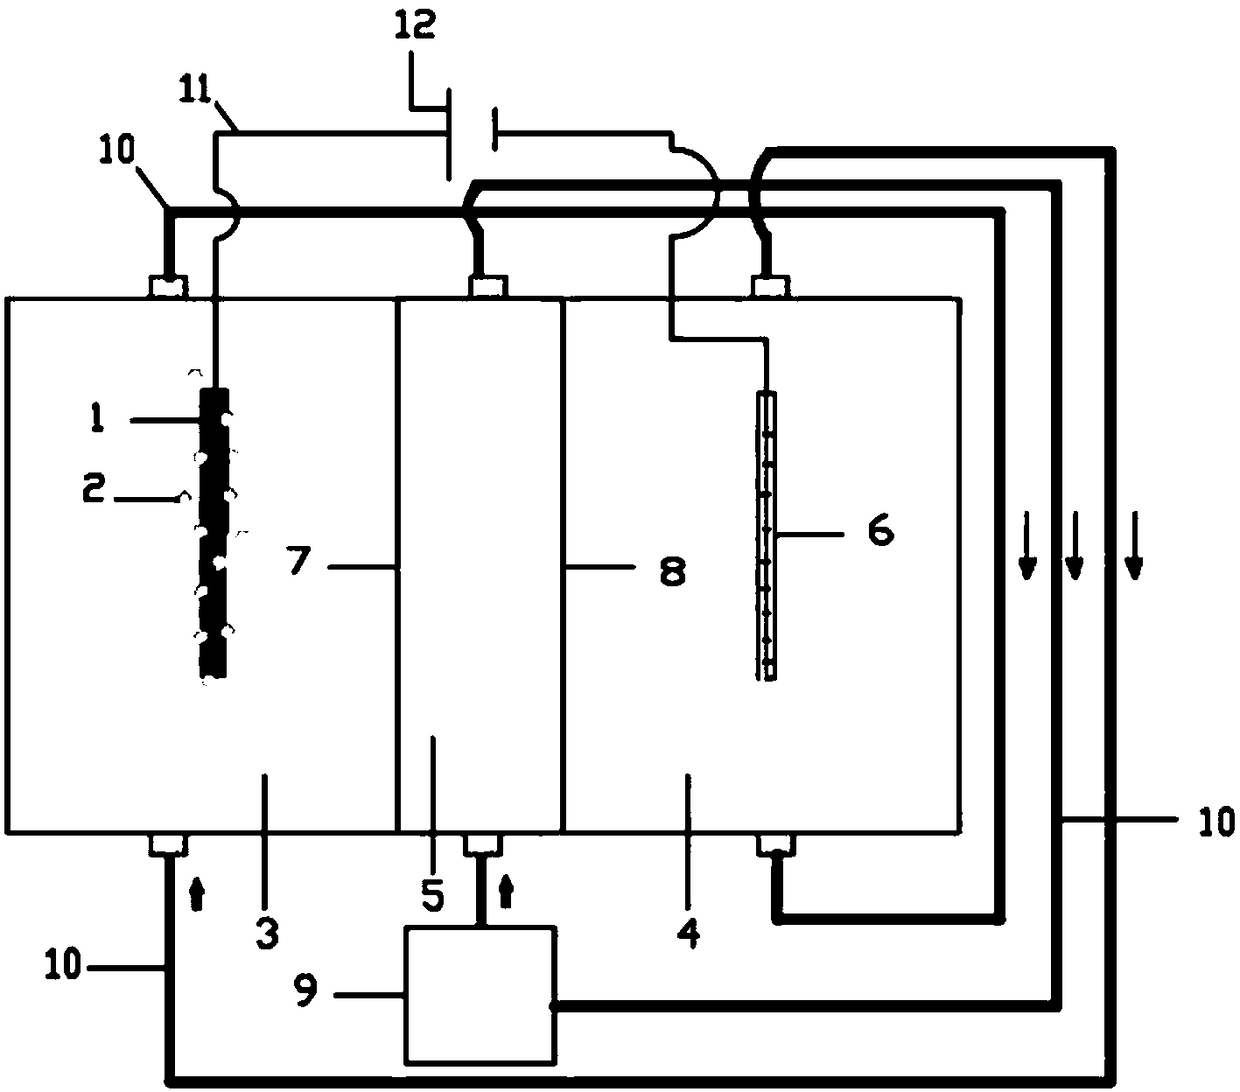 MEDC (Microbial Electrolytic Desalting Cell) reactor device